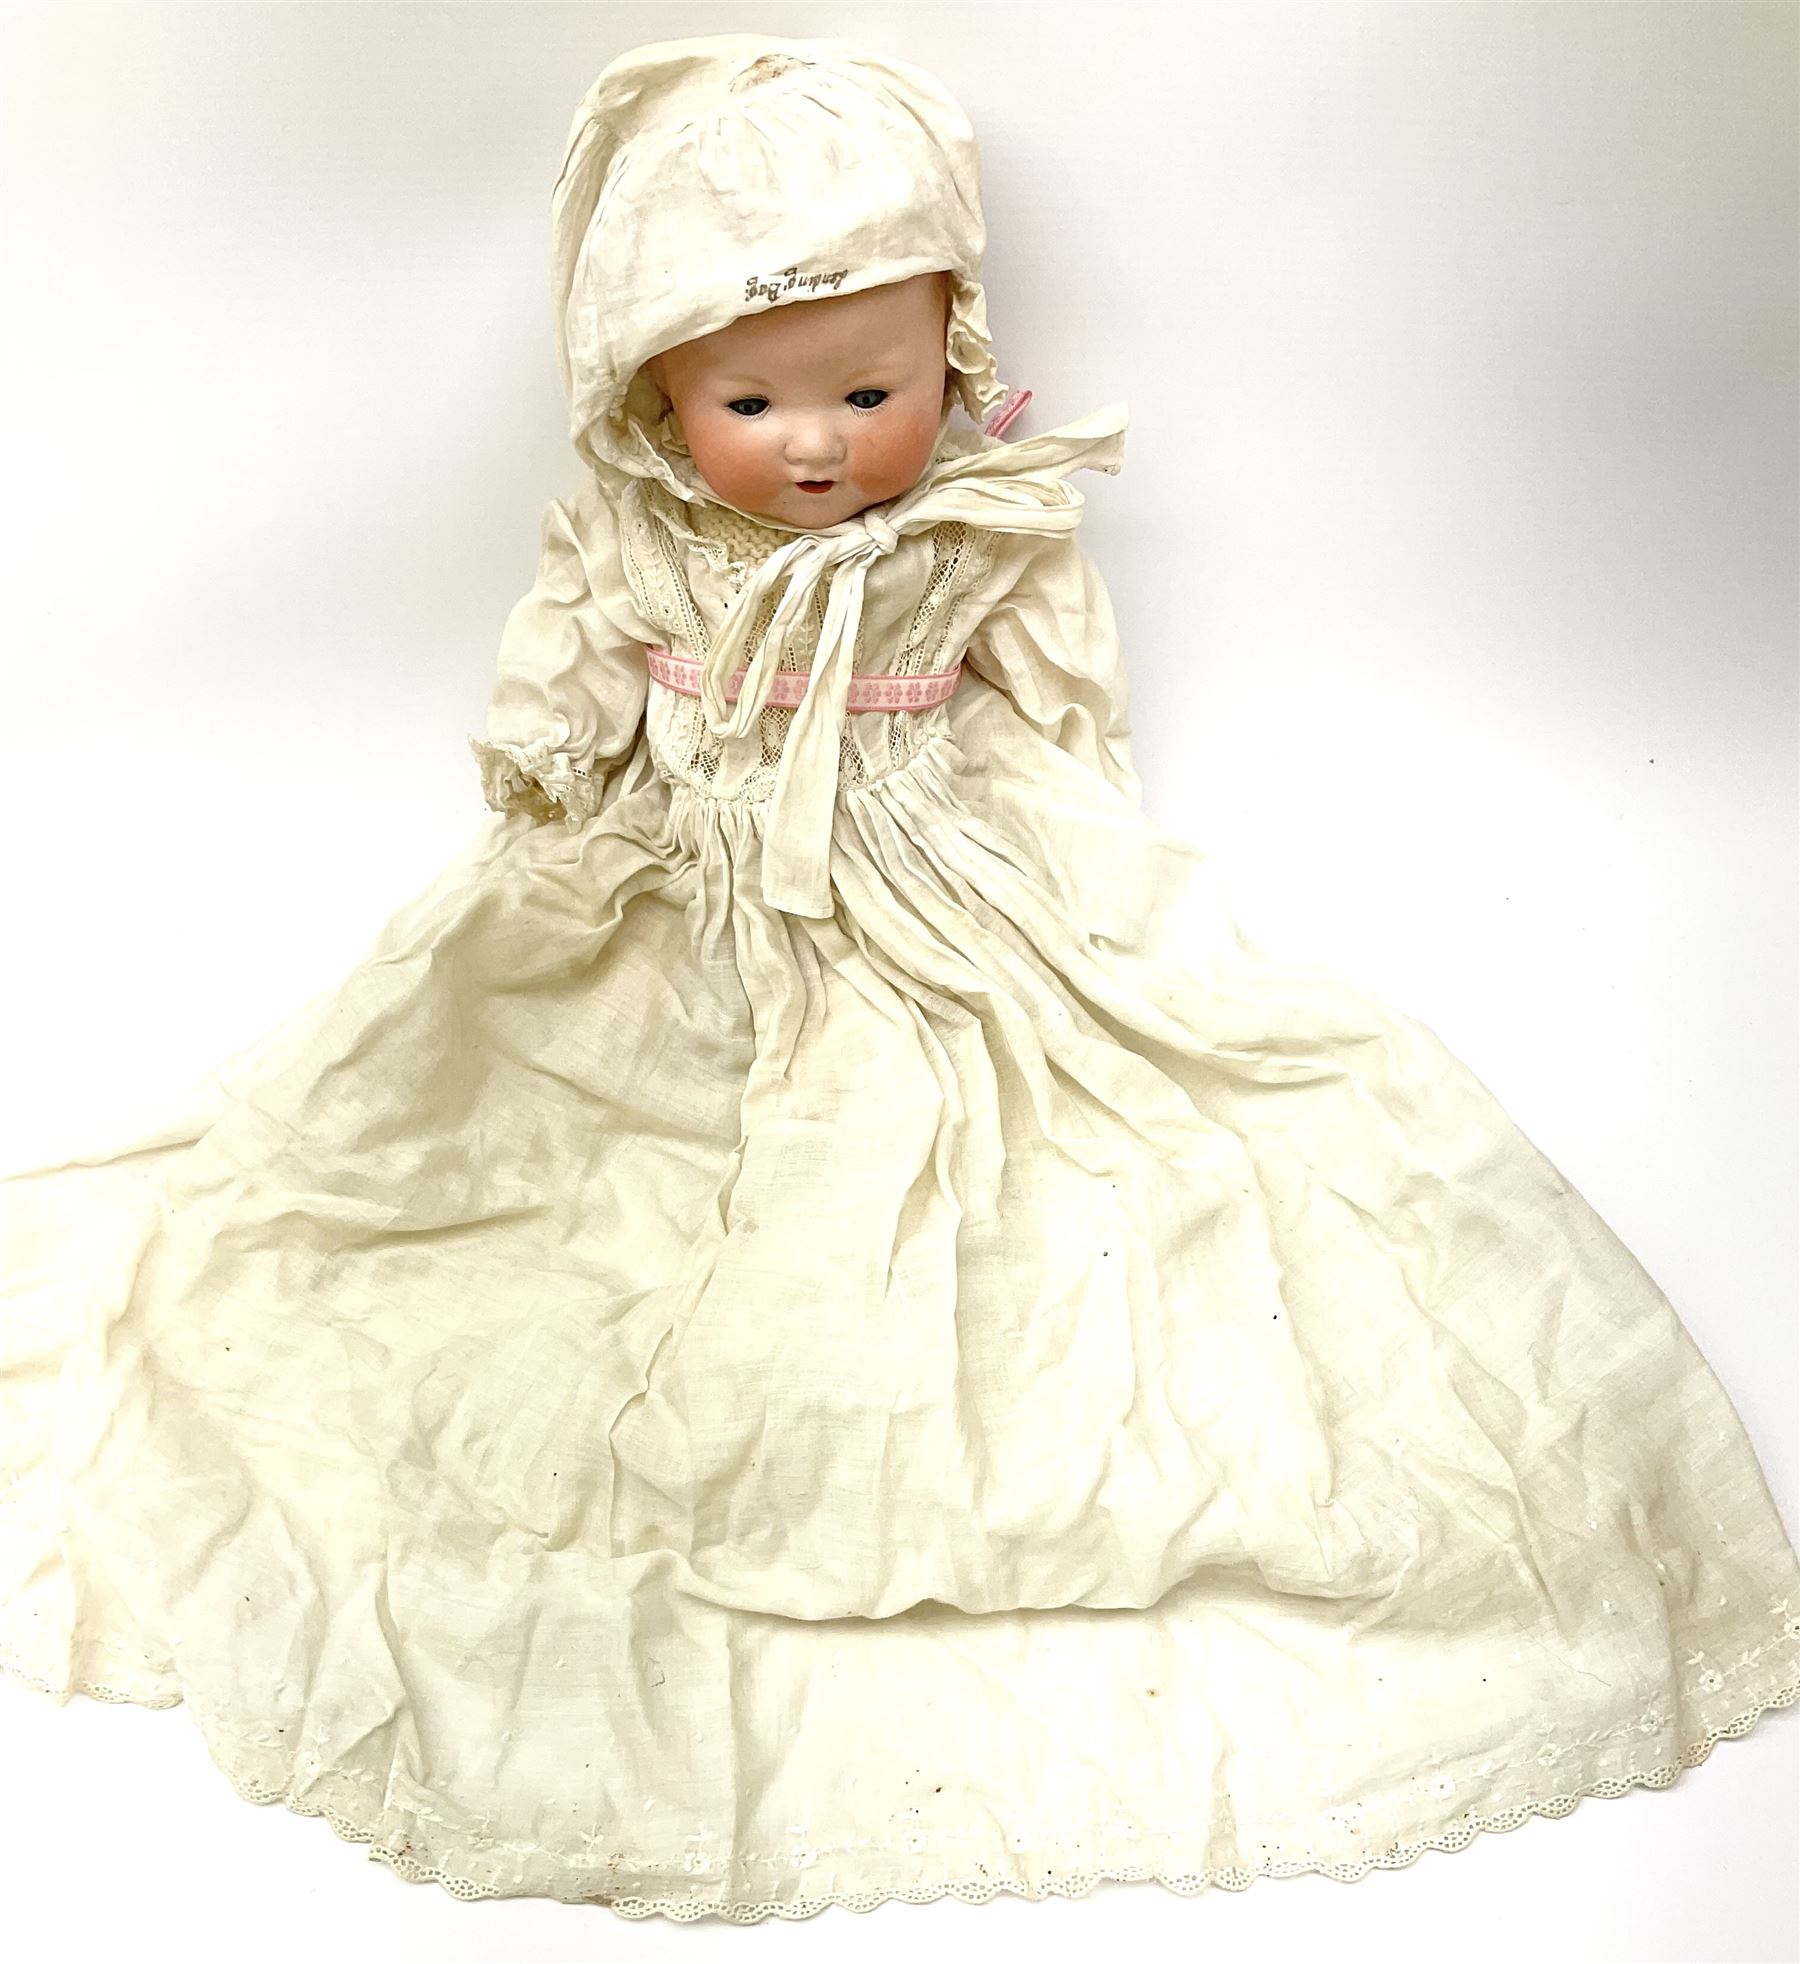 Armand Marseille Koppelsdorf bisque head doll with applied hair - Image 5 of 17